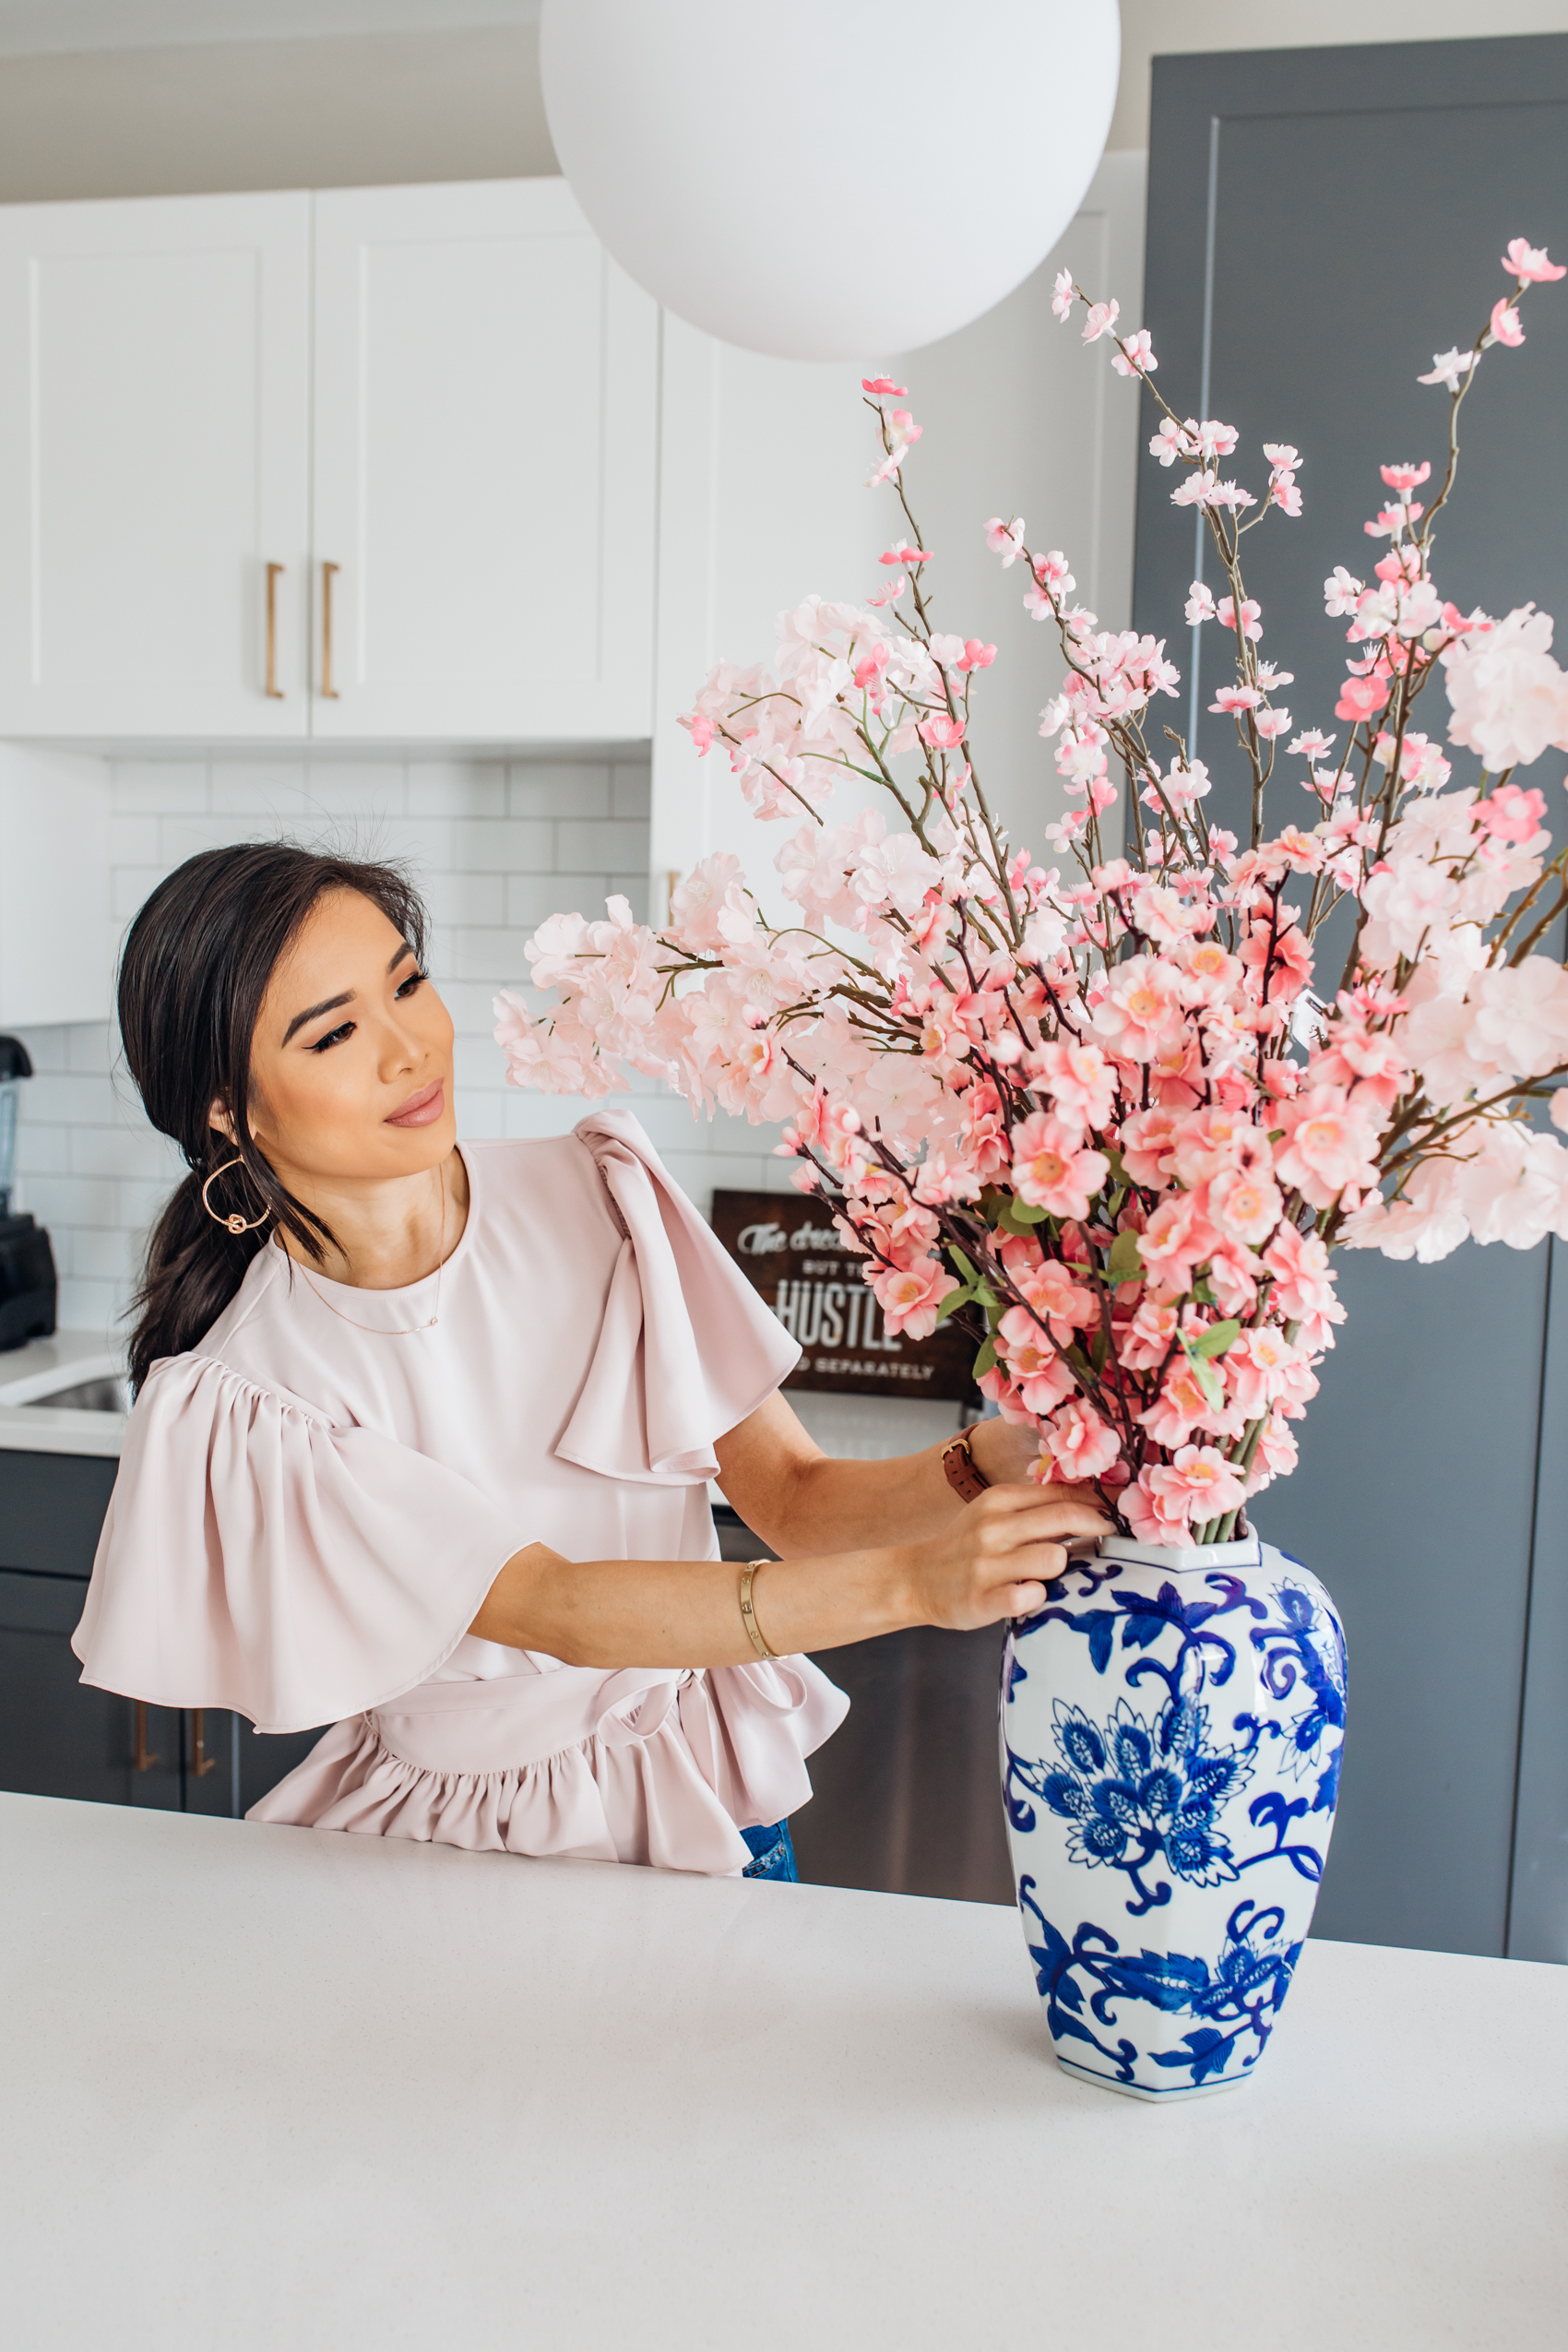 Hoang-Kim creates a faux cherry blossom and sakura arrangement using a ginger jar from At Home in her two-toned kitchen in Dallas, Texas